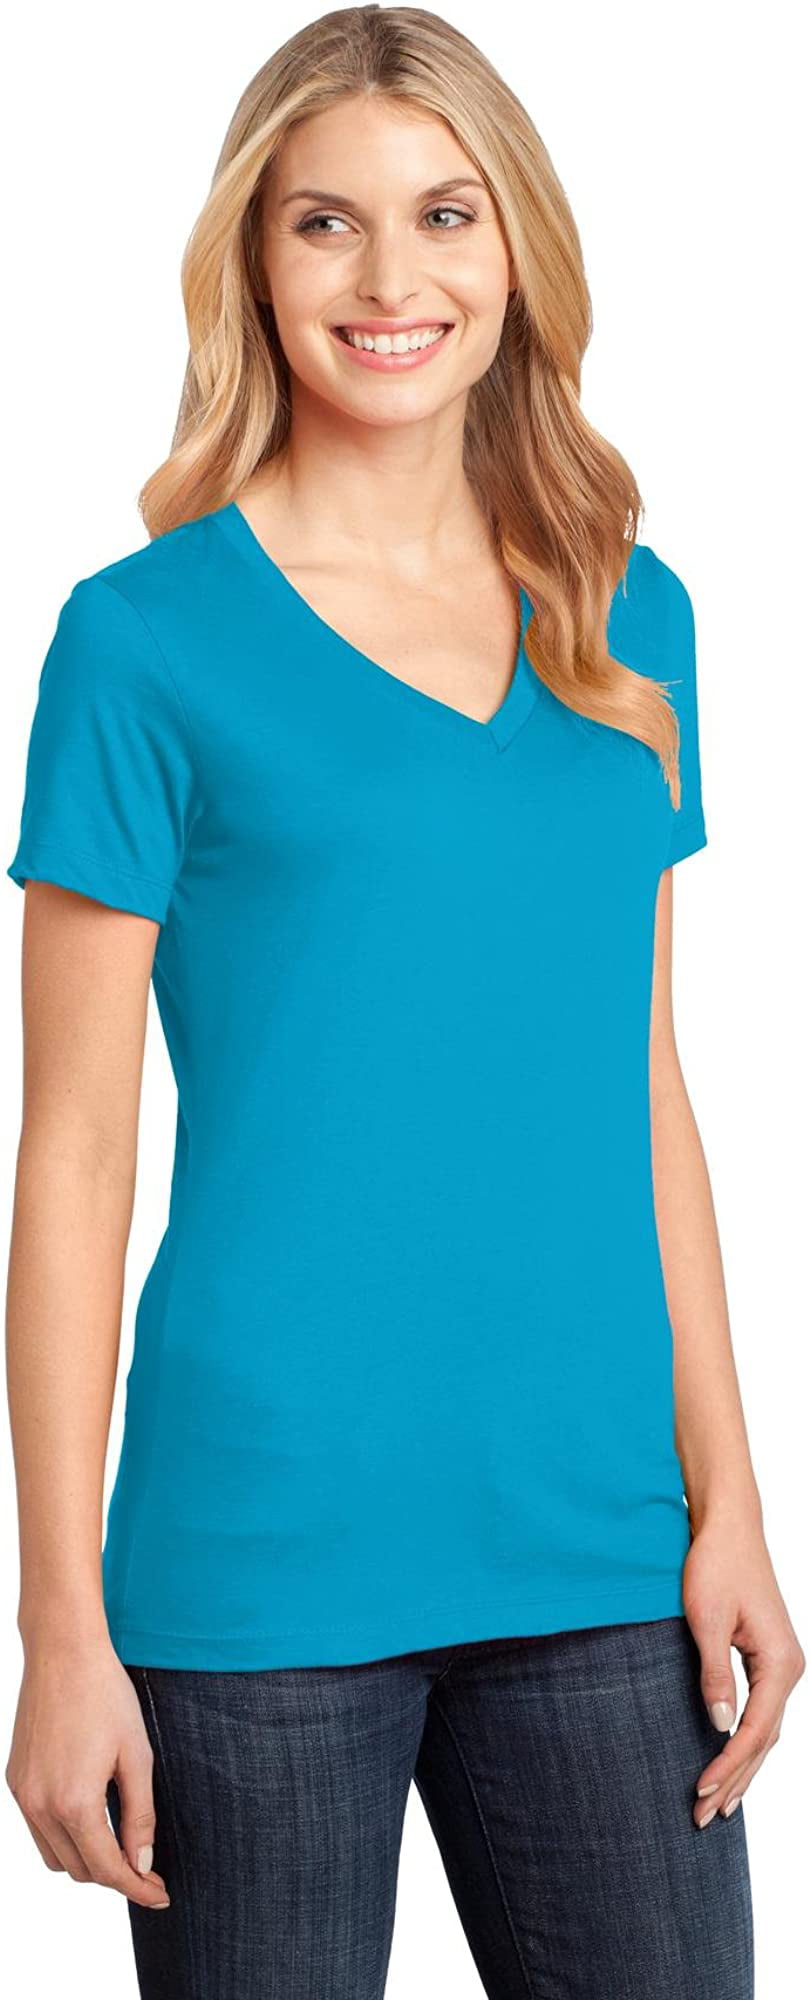 DM1170L District Women's Perfect Weight V-Neck Tee 